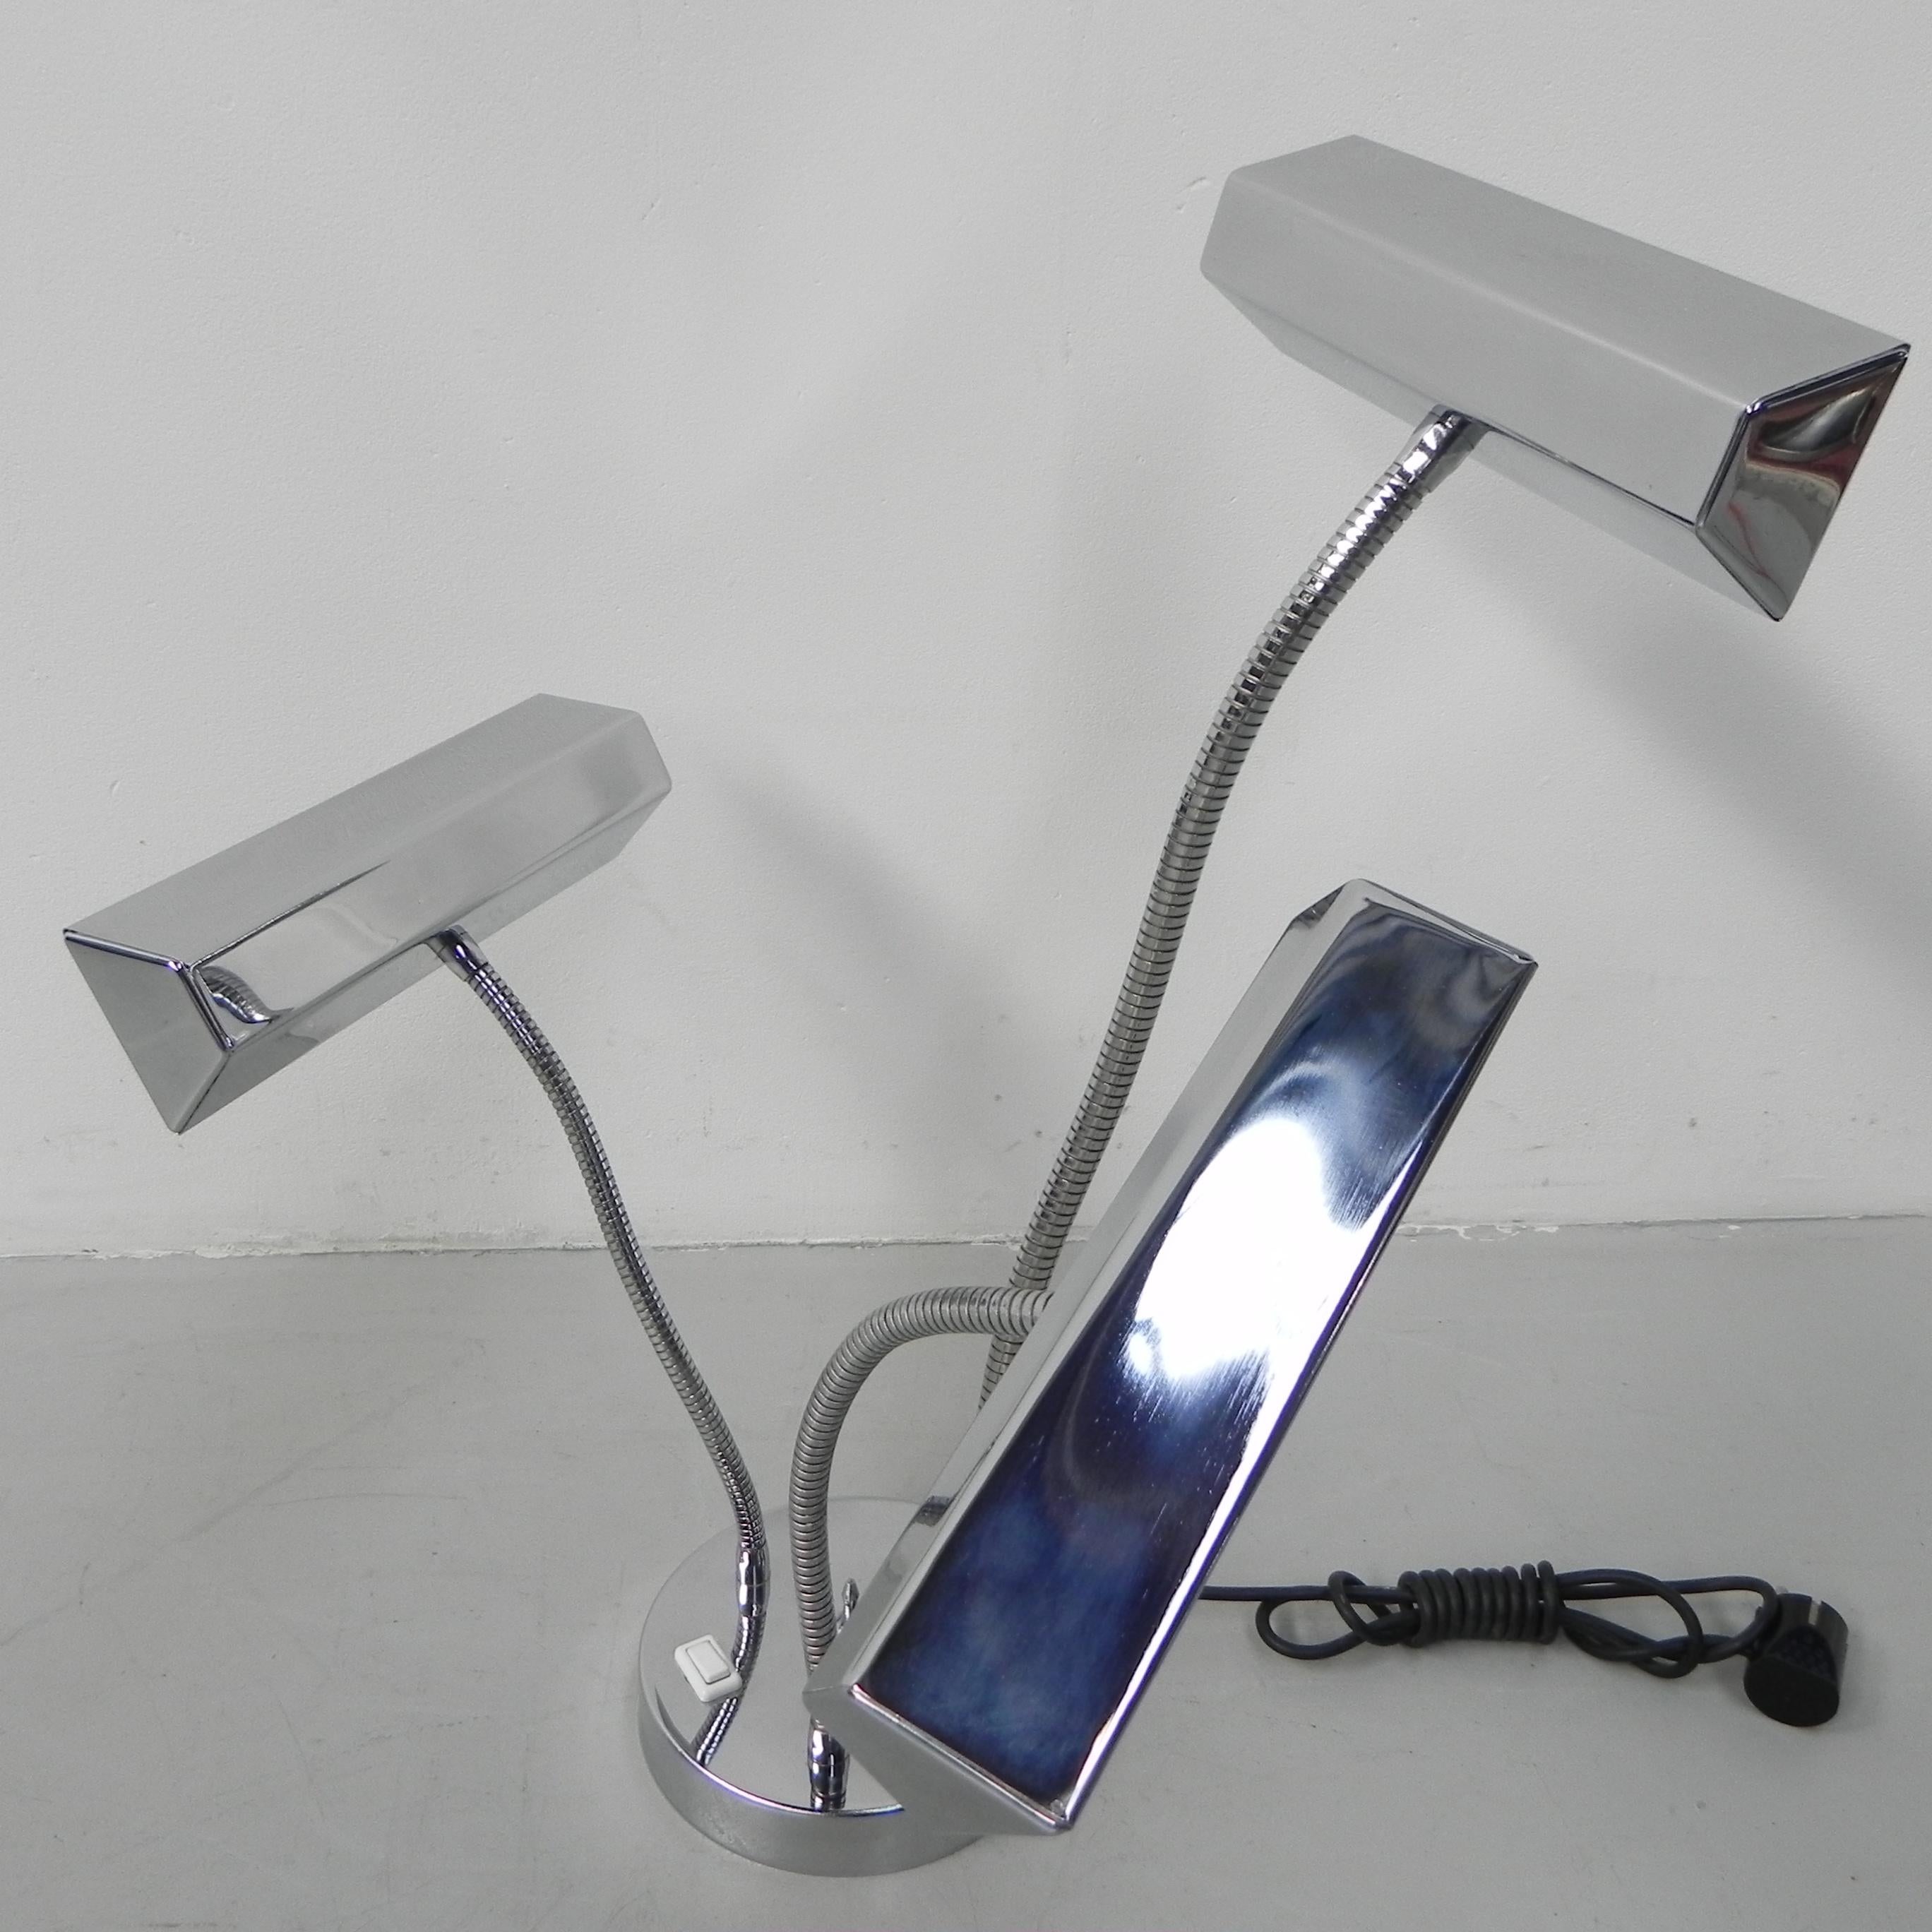 Height (max): 60 cm.
Width: 40 cm.
Depth: 30 cm.
Shade dimensions: 5x8x25 cm.
Base plate: Ø17 cm, height: 3.5 cm.
The lamp is equipped with 3 small bulb holders (E14).
Origin: France, 1960s.
Material: chromed steel.
All our lamps are suitable for